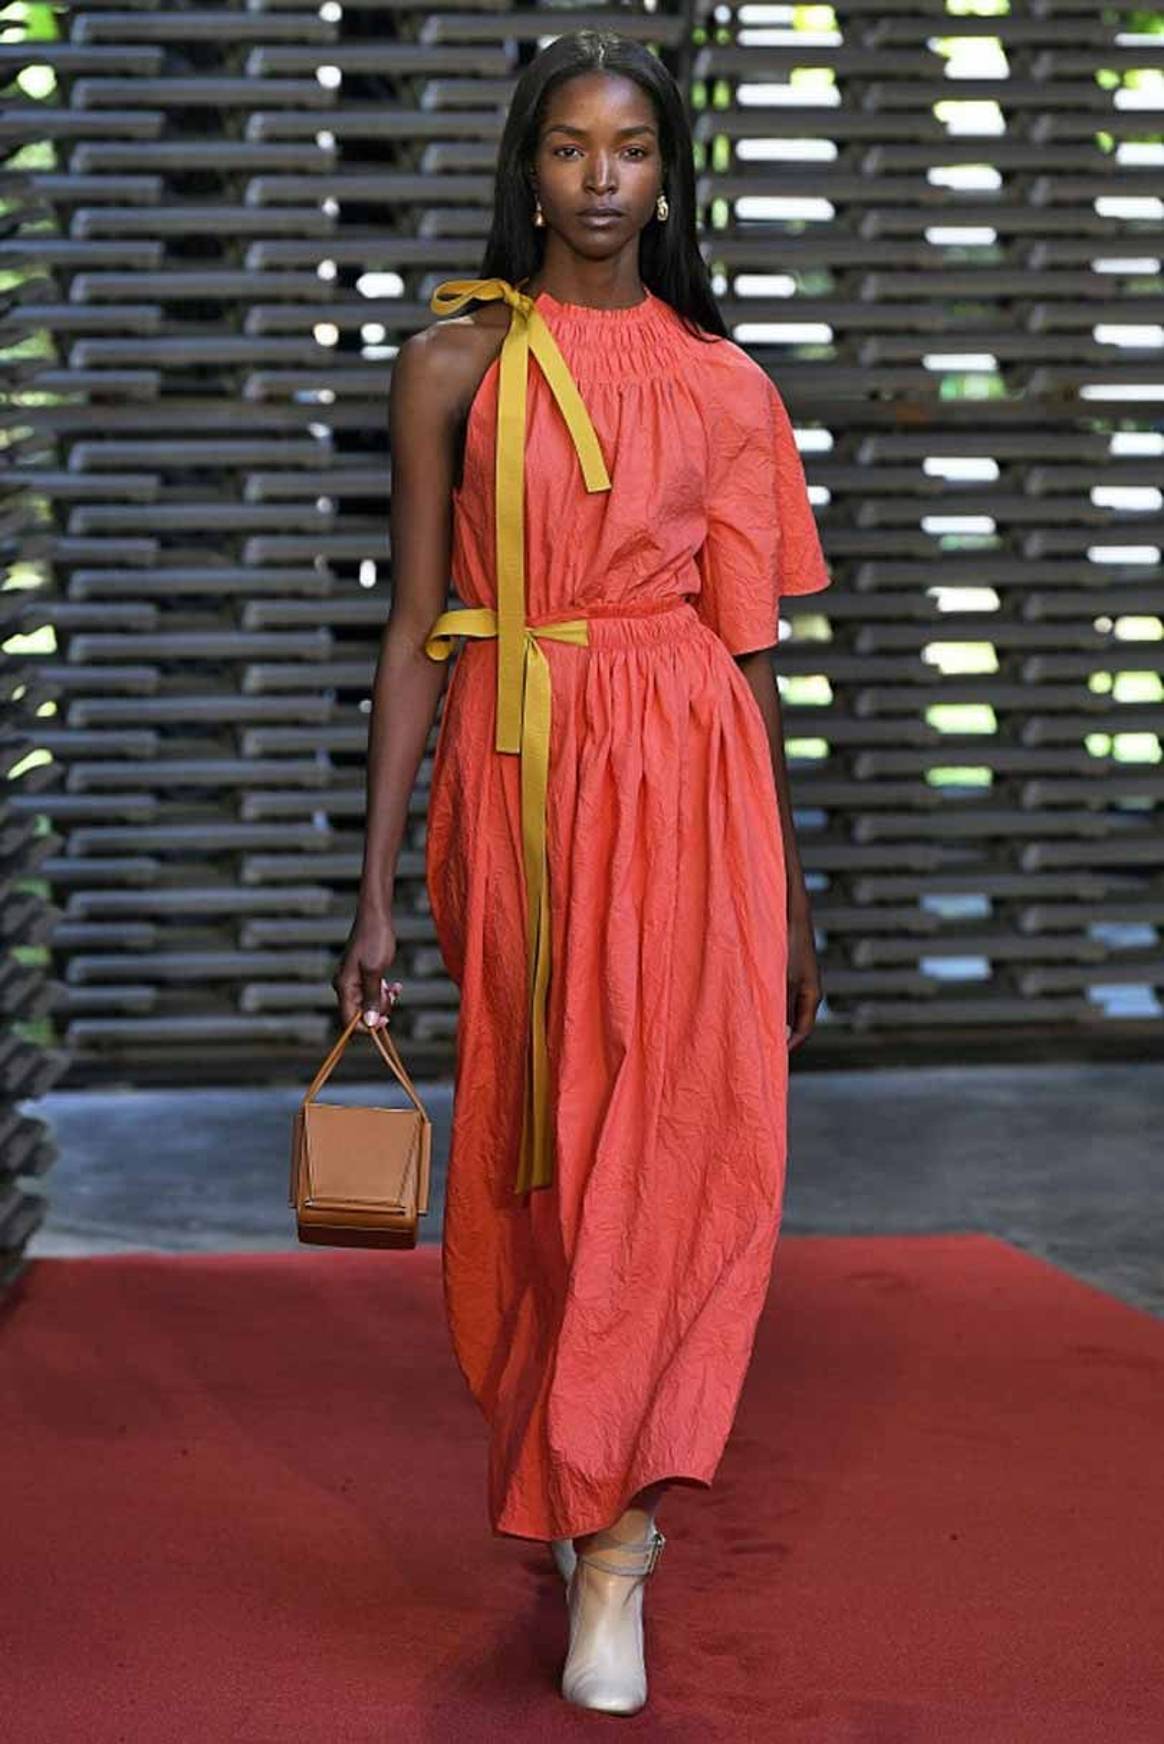 Spotted on the runway: Colour of the year 2019, Living Coral